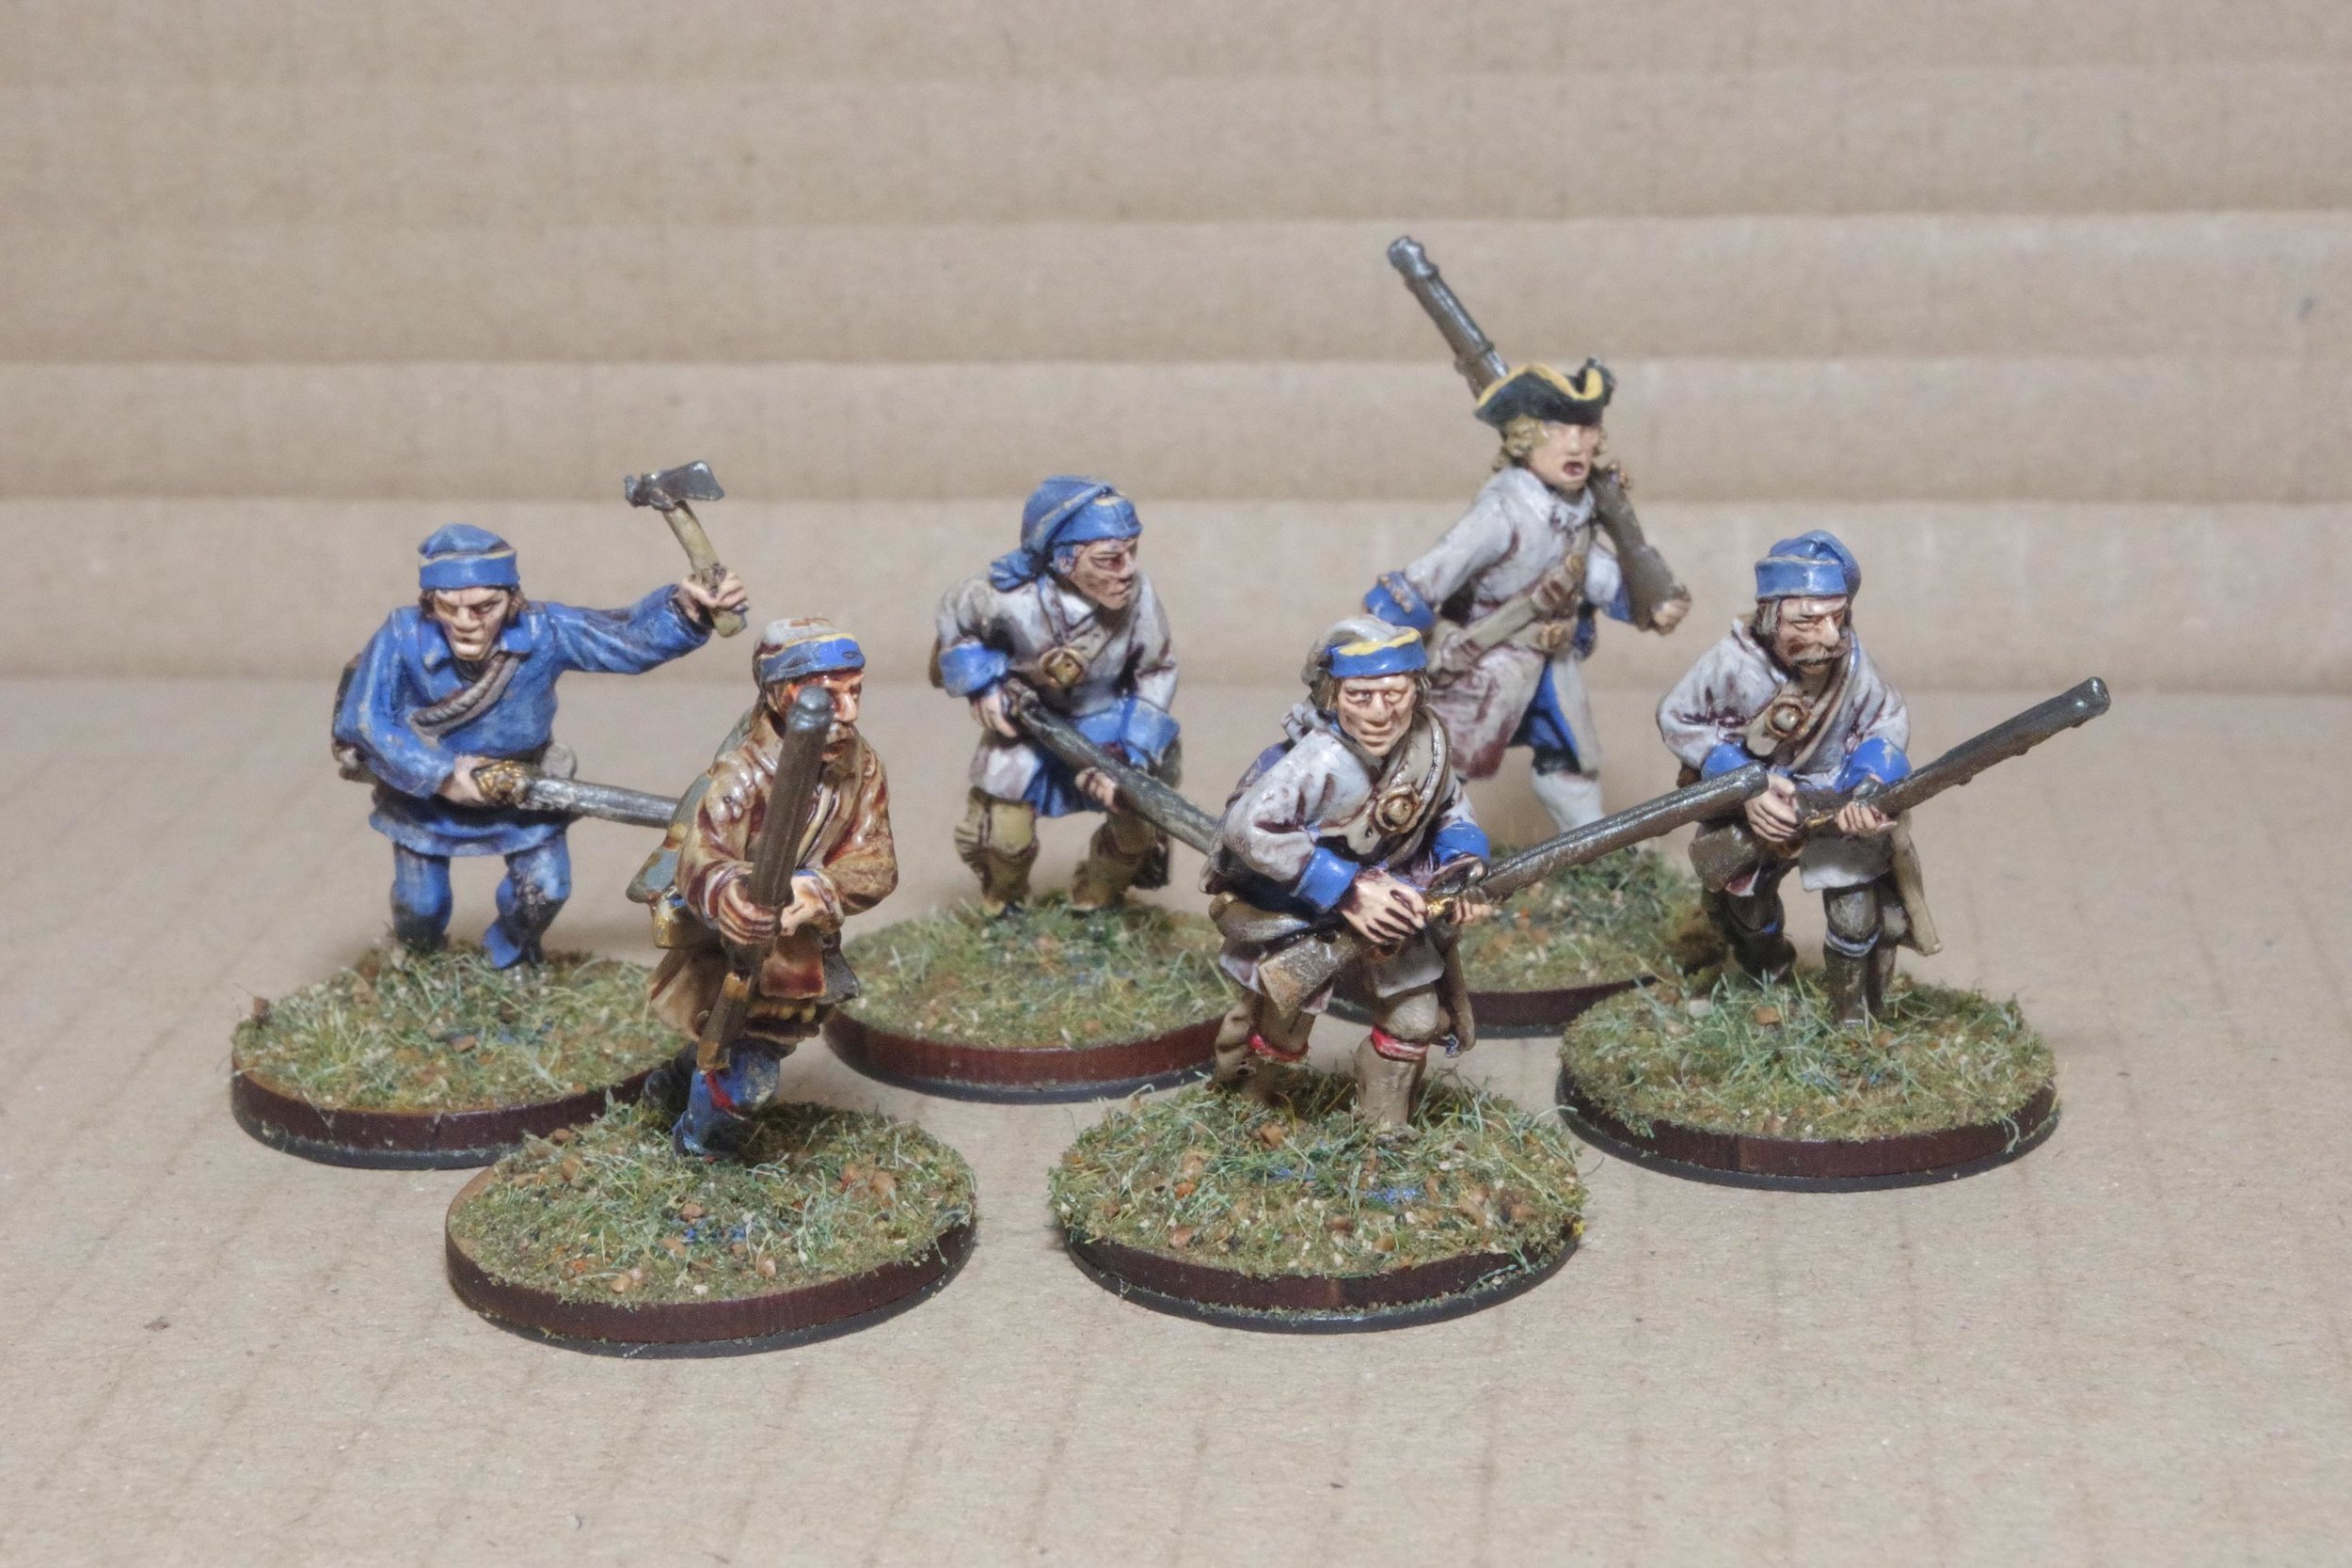 Compagnies Franches de la Marine skirmishers from Carole